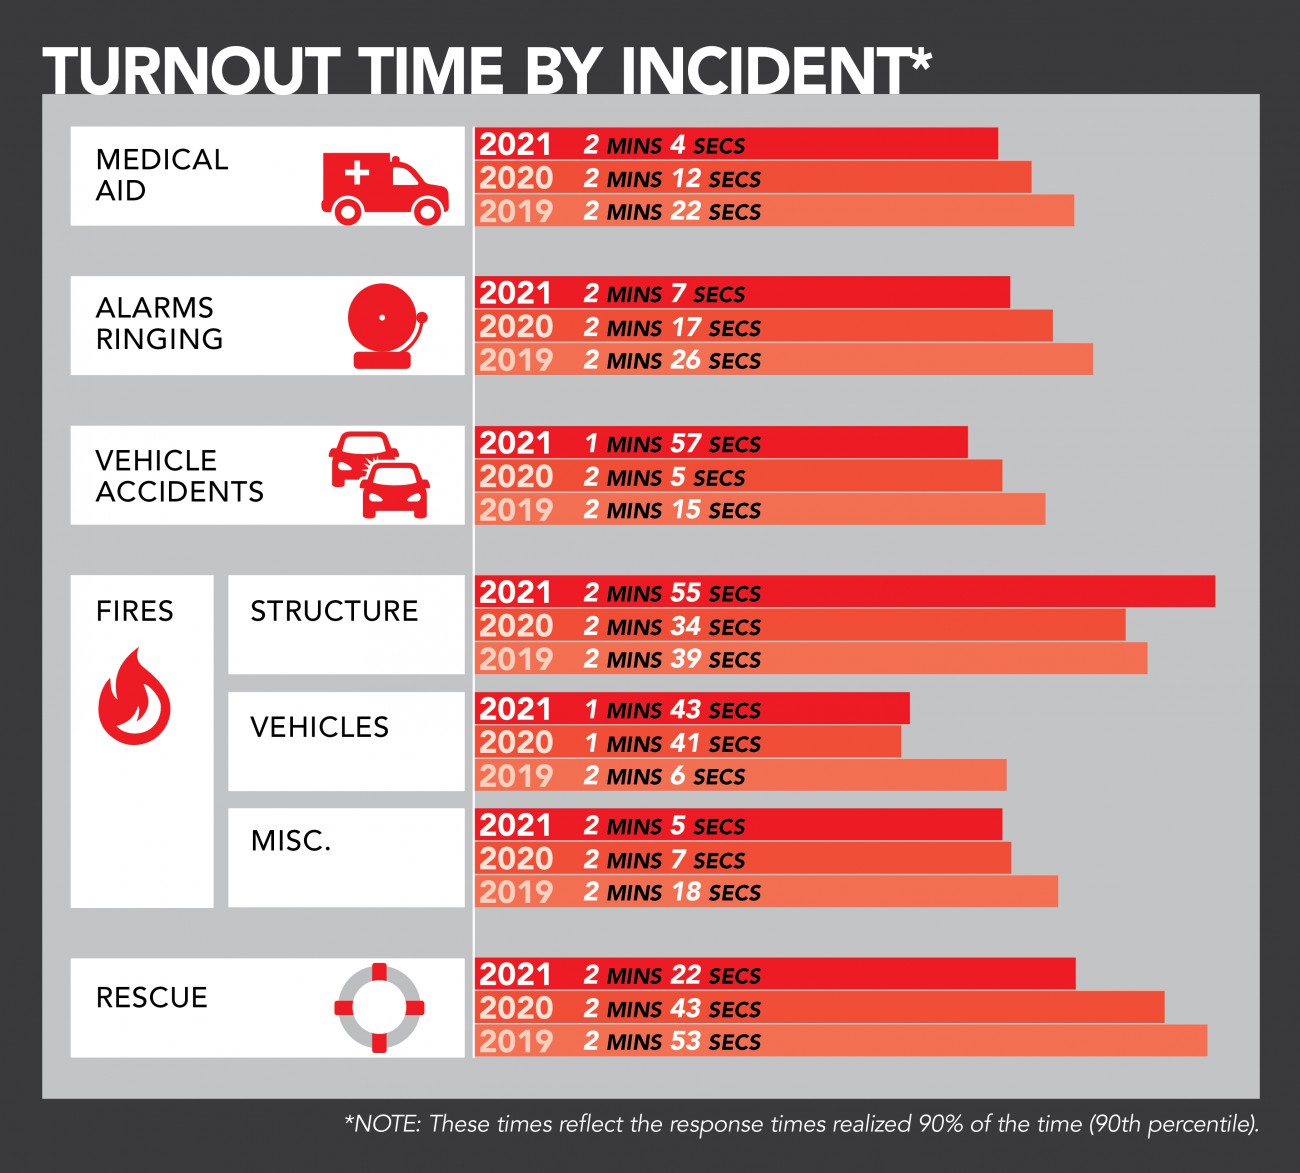 Infographic: Turnout time: In 2021, we achieved turnout time of 2 minutes, 7 seconds across all incident types for 90% of our responses.